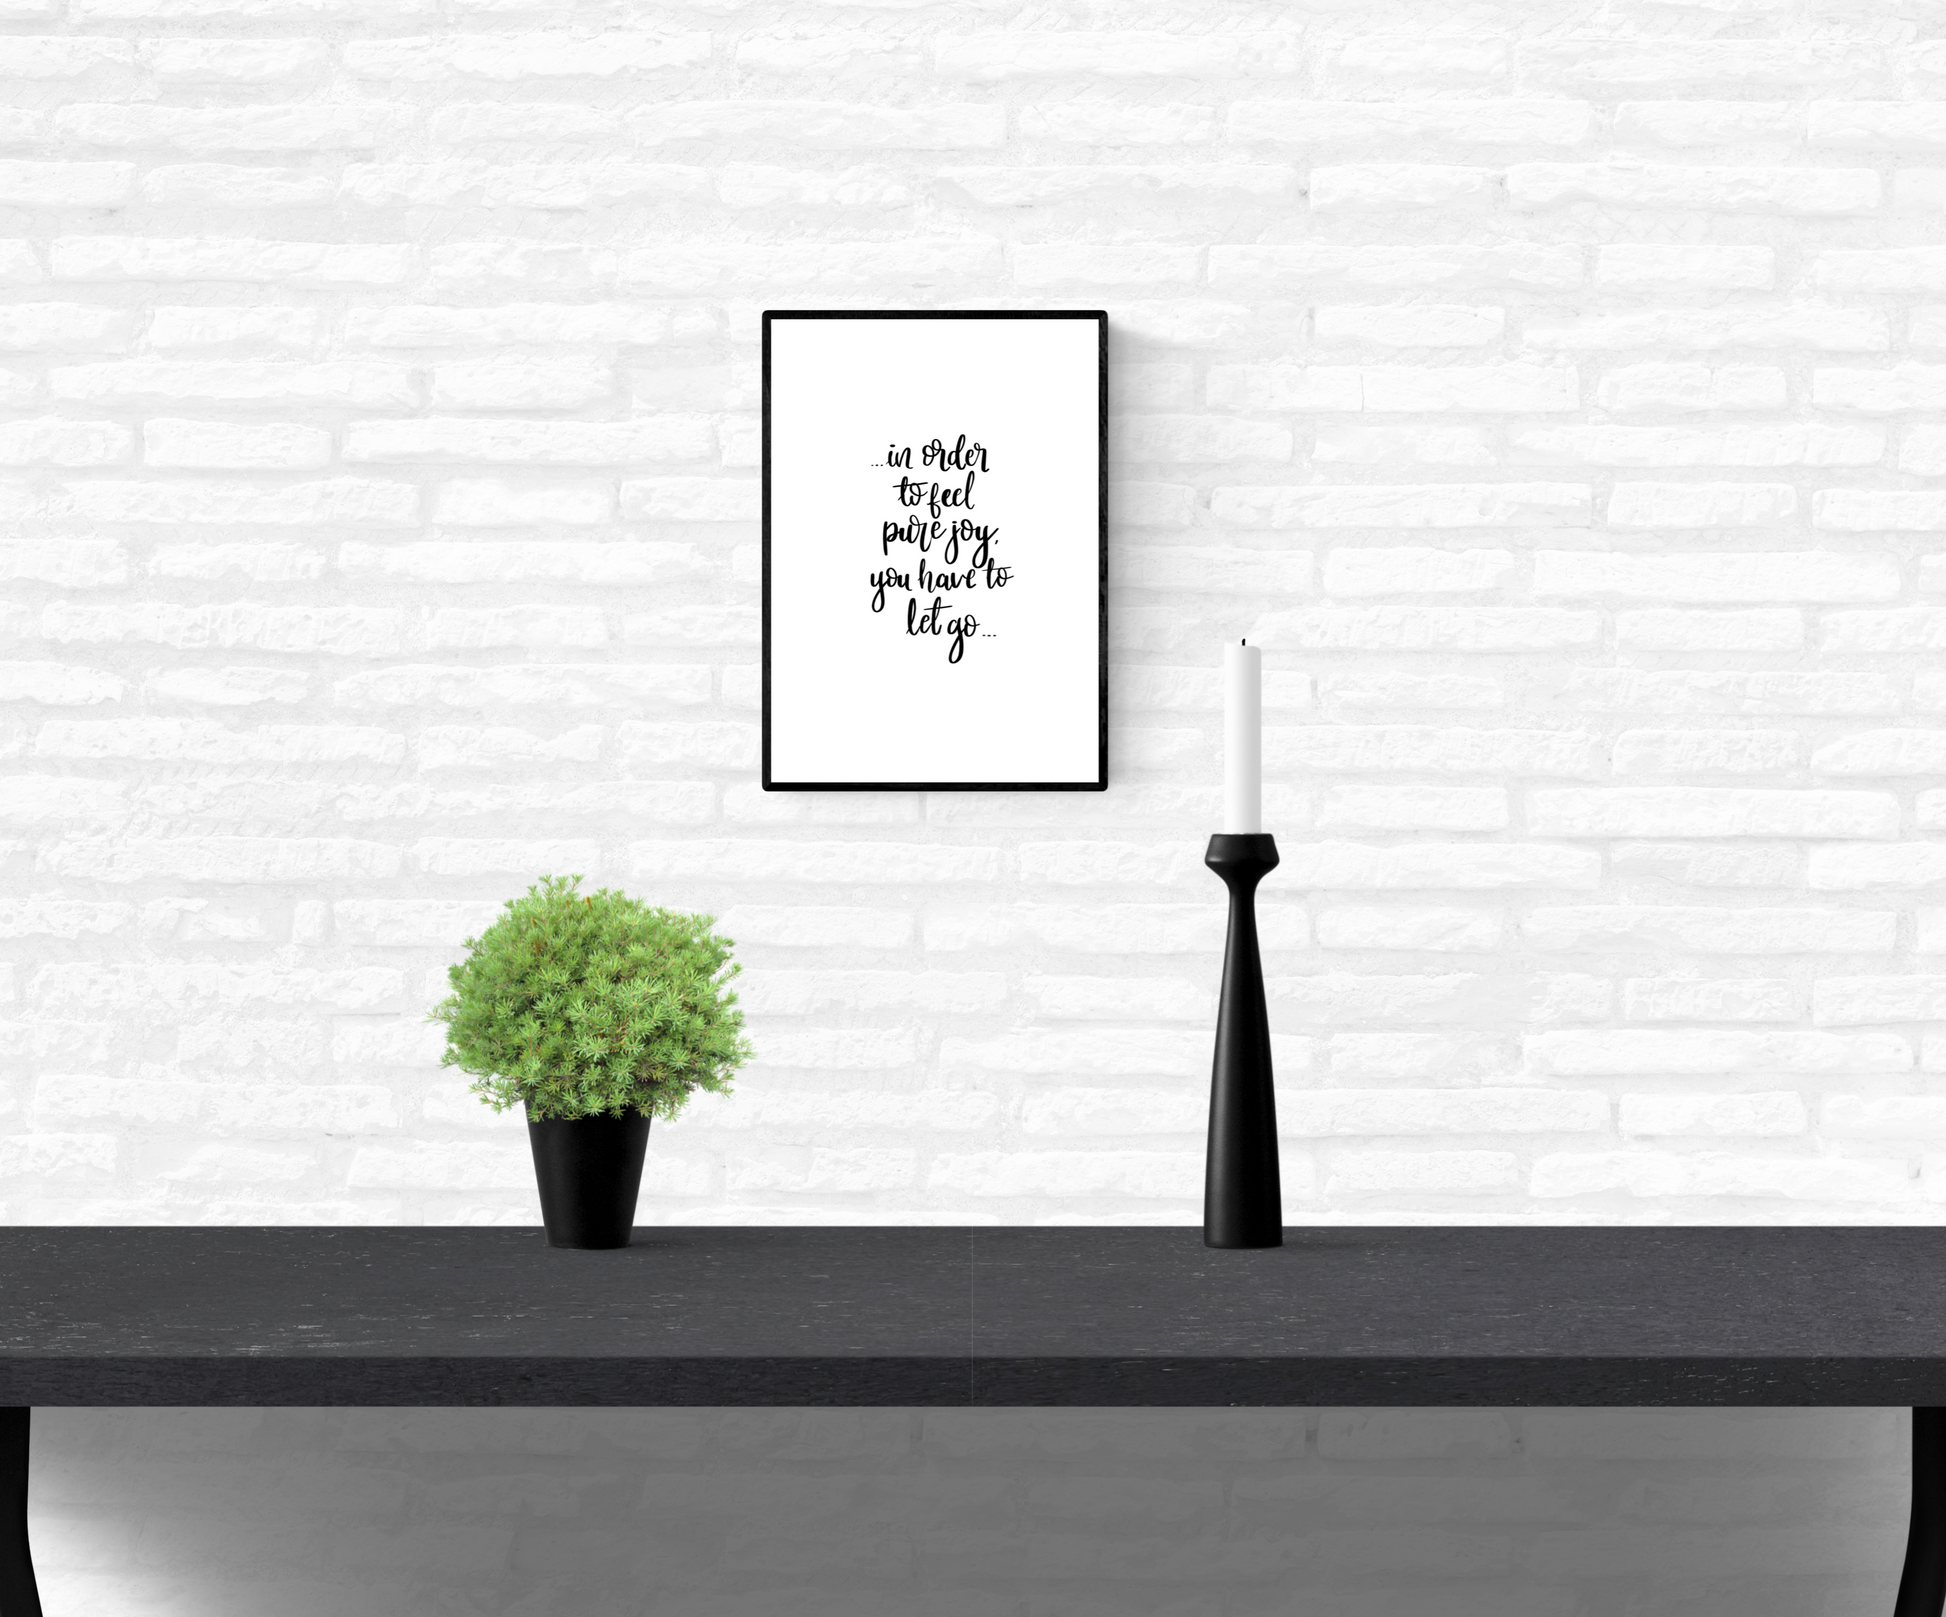 Wall quote print with the words, “in order to feel pure joy you have to let go”, framed and mounted on a home’s interior white brick wall